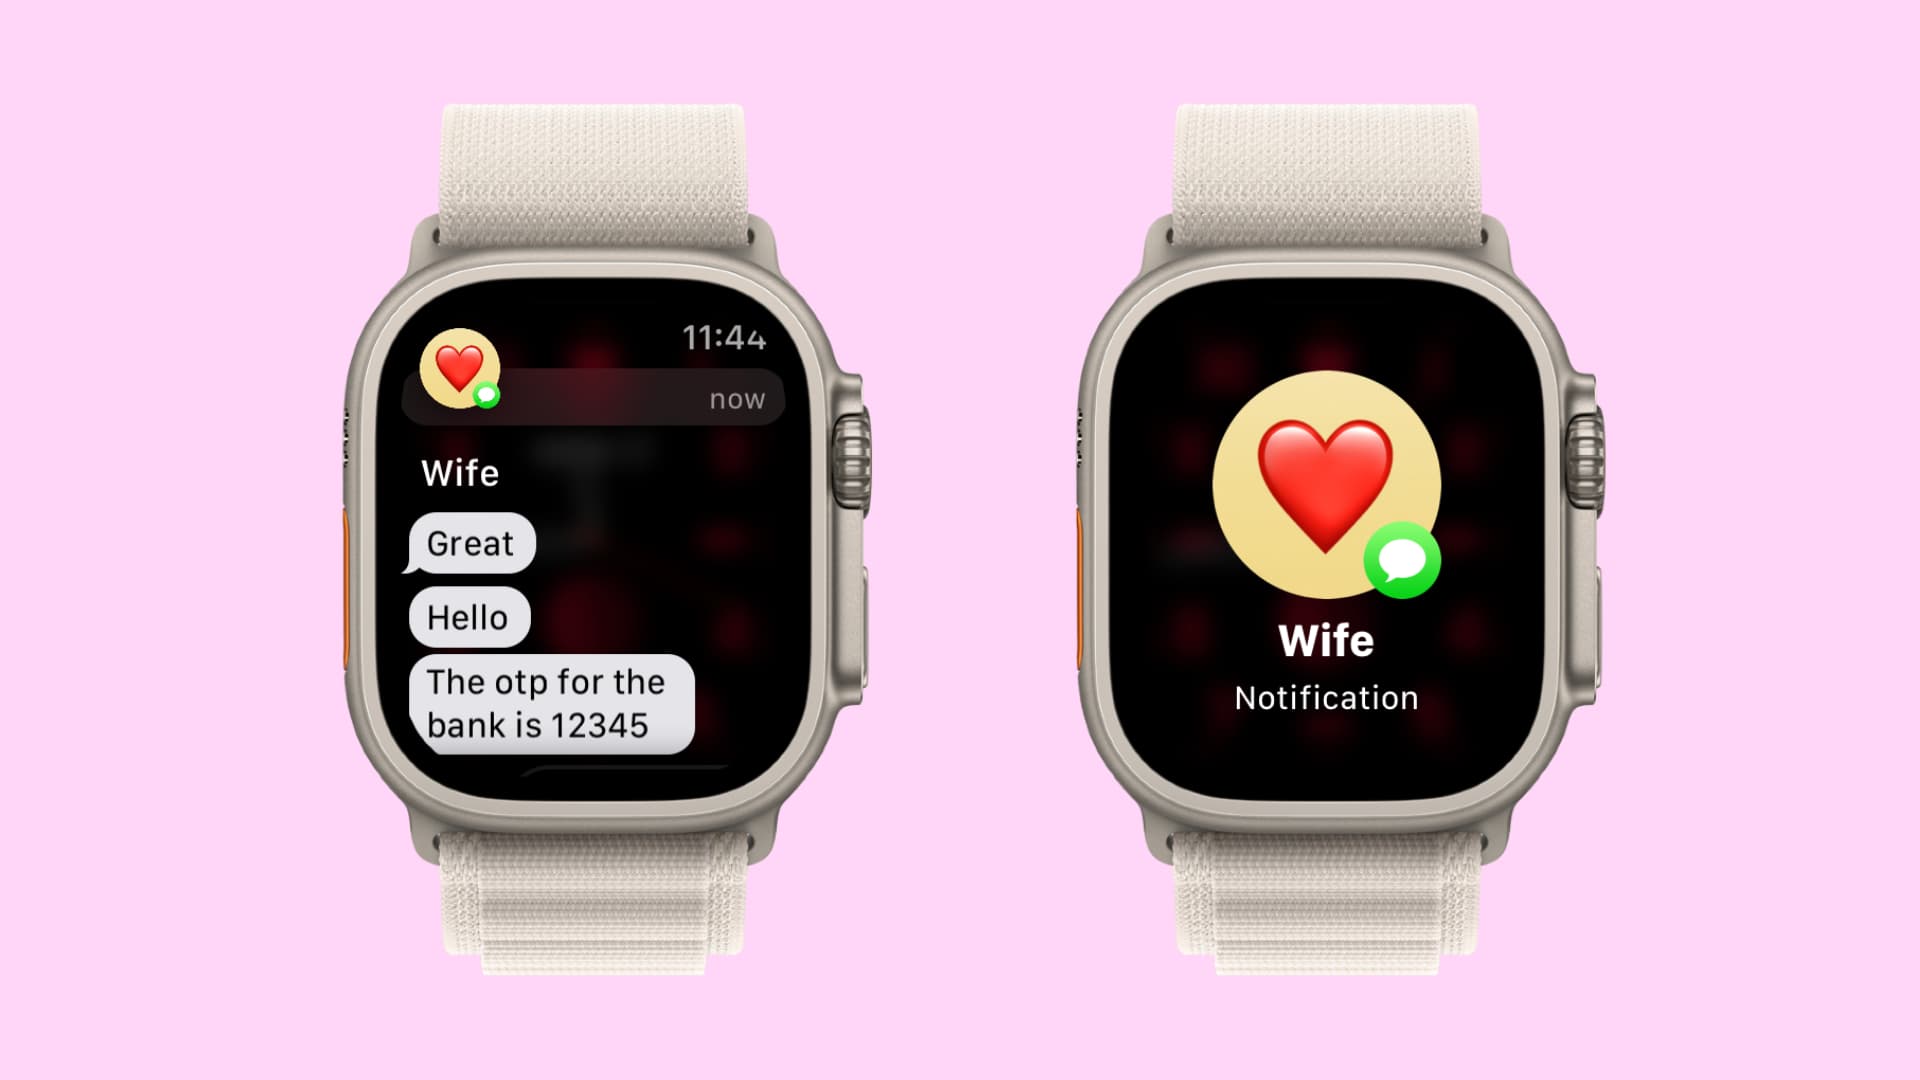 Normal and private notifications on Apple Watch